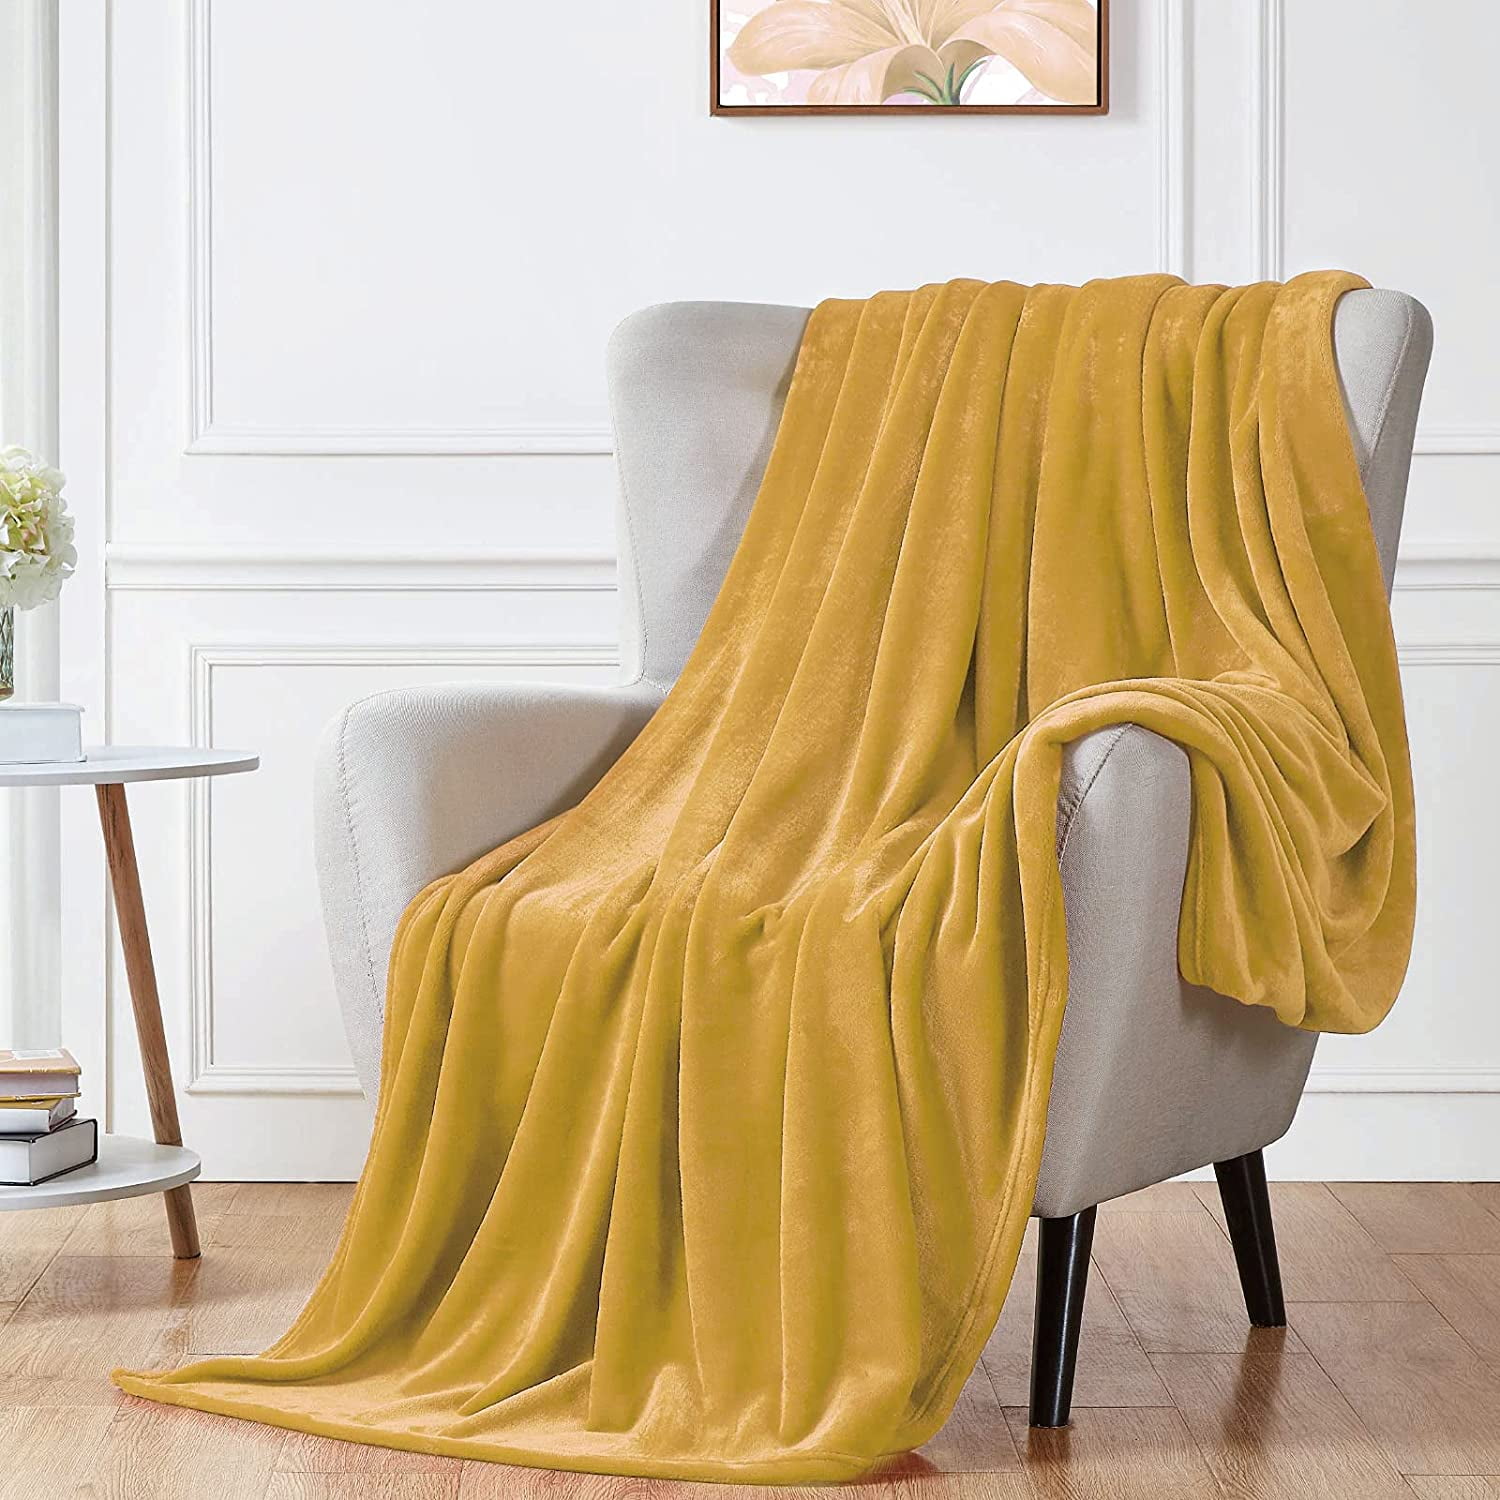 Flannel Delicate Texture Super Soft Thicken Warm-keeping Blanket Bed Couch 